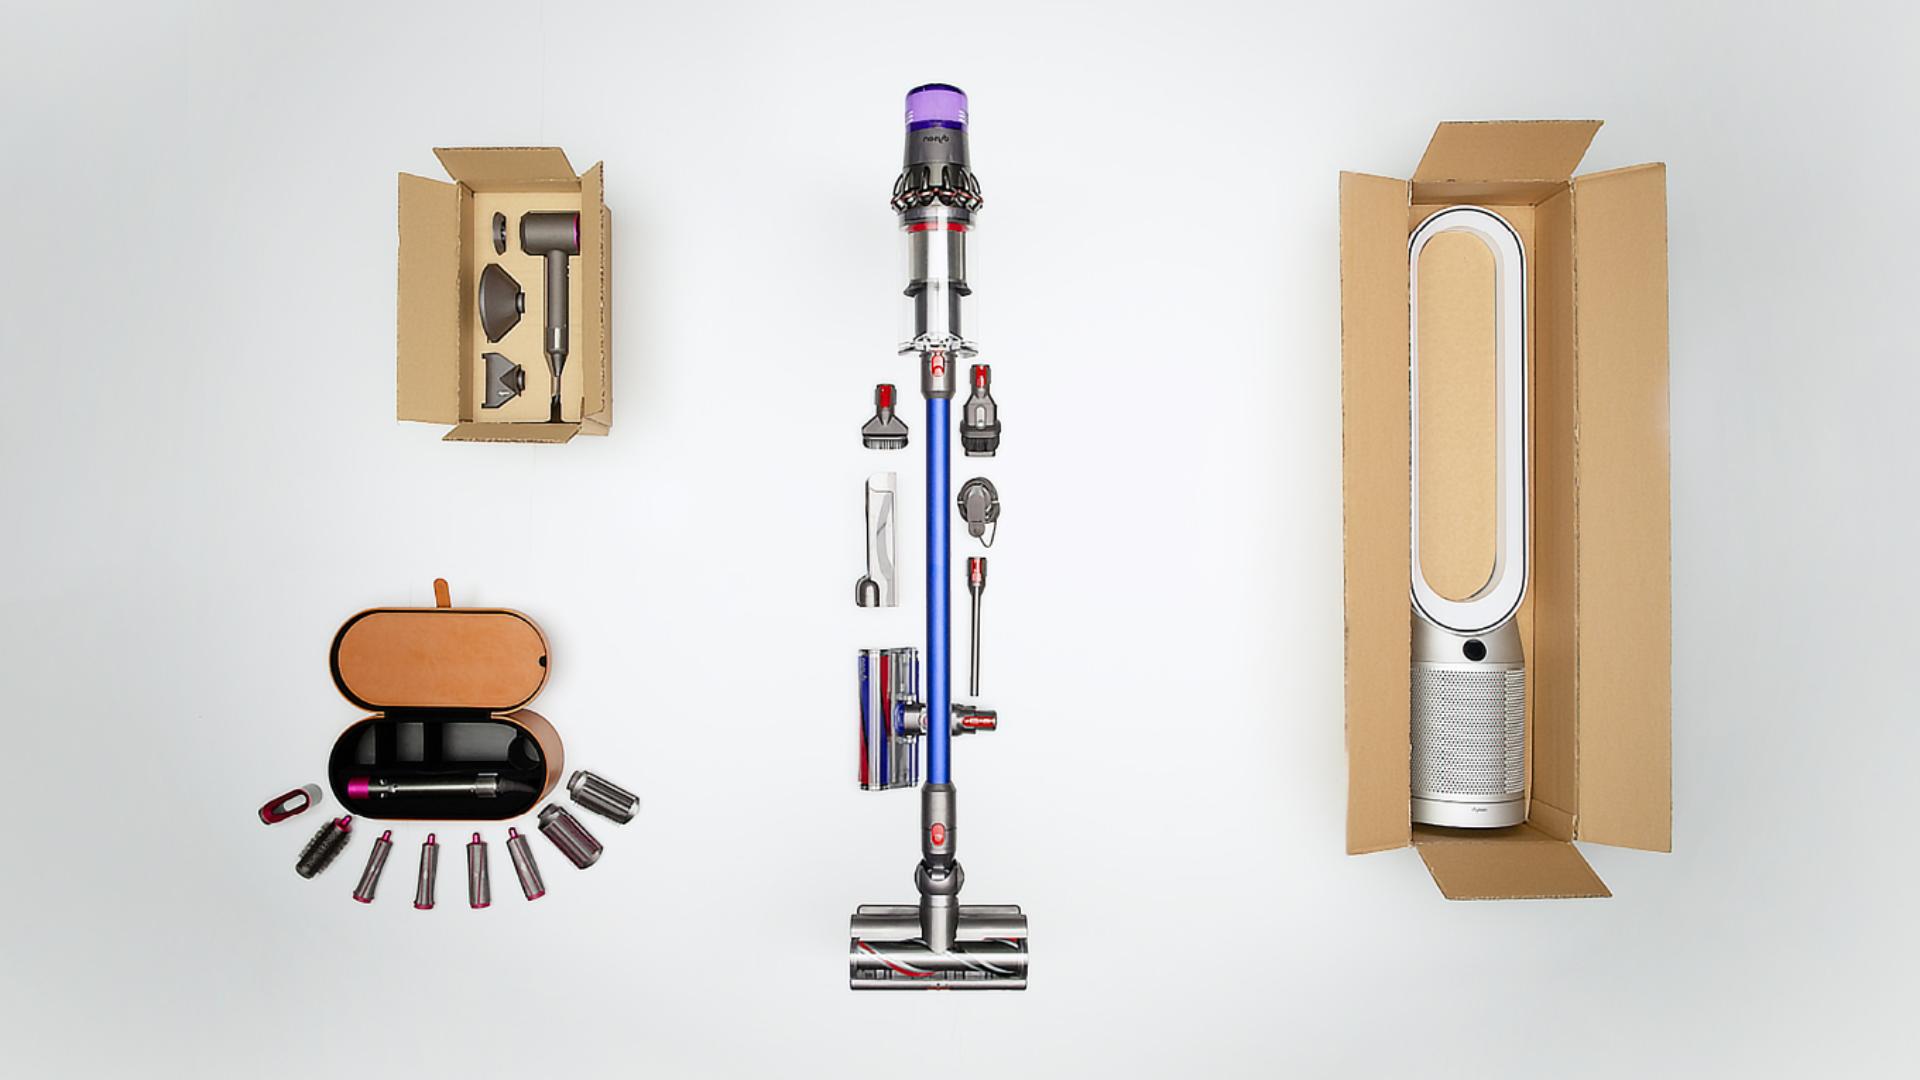 Refurbished Dyson machines with accessories and recyclable packaging.